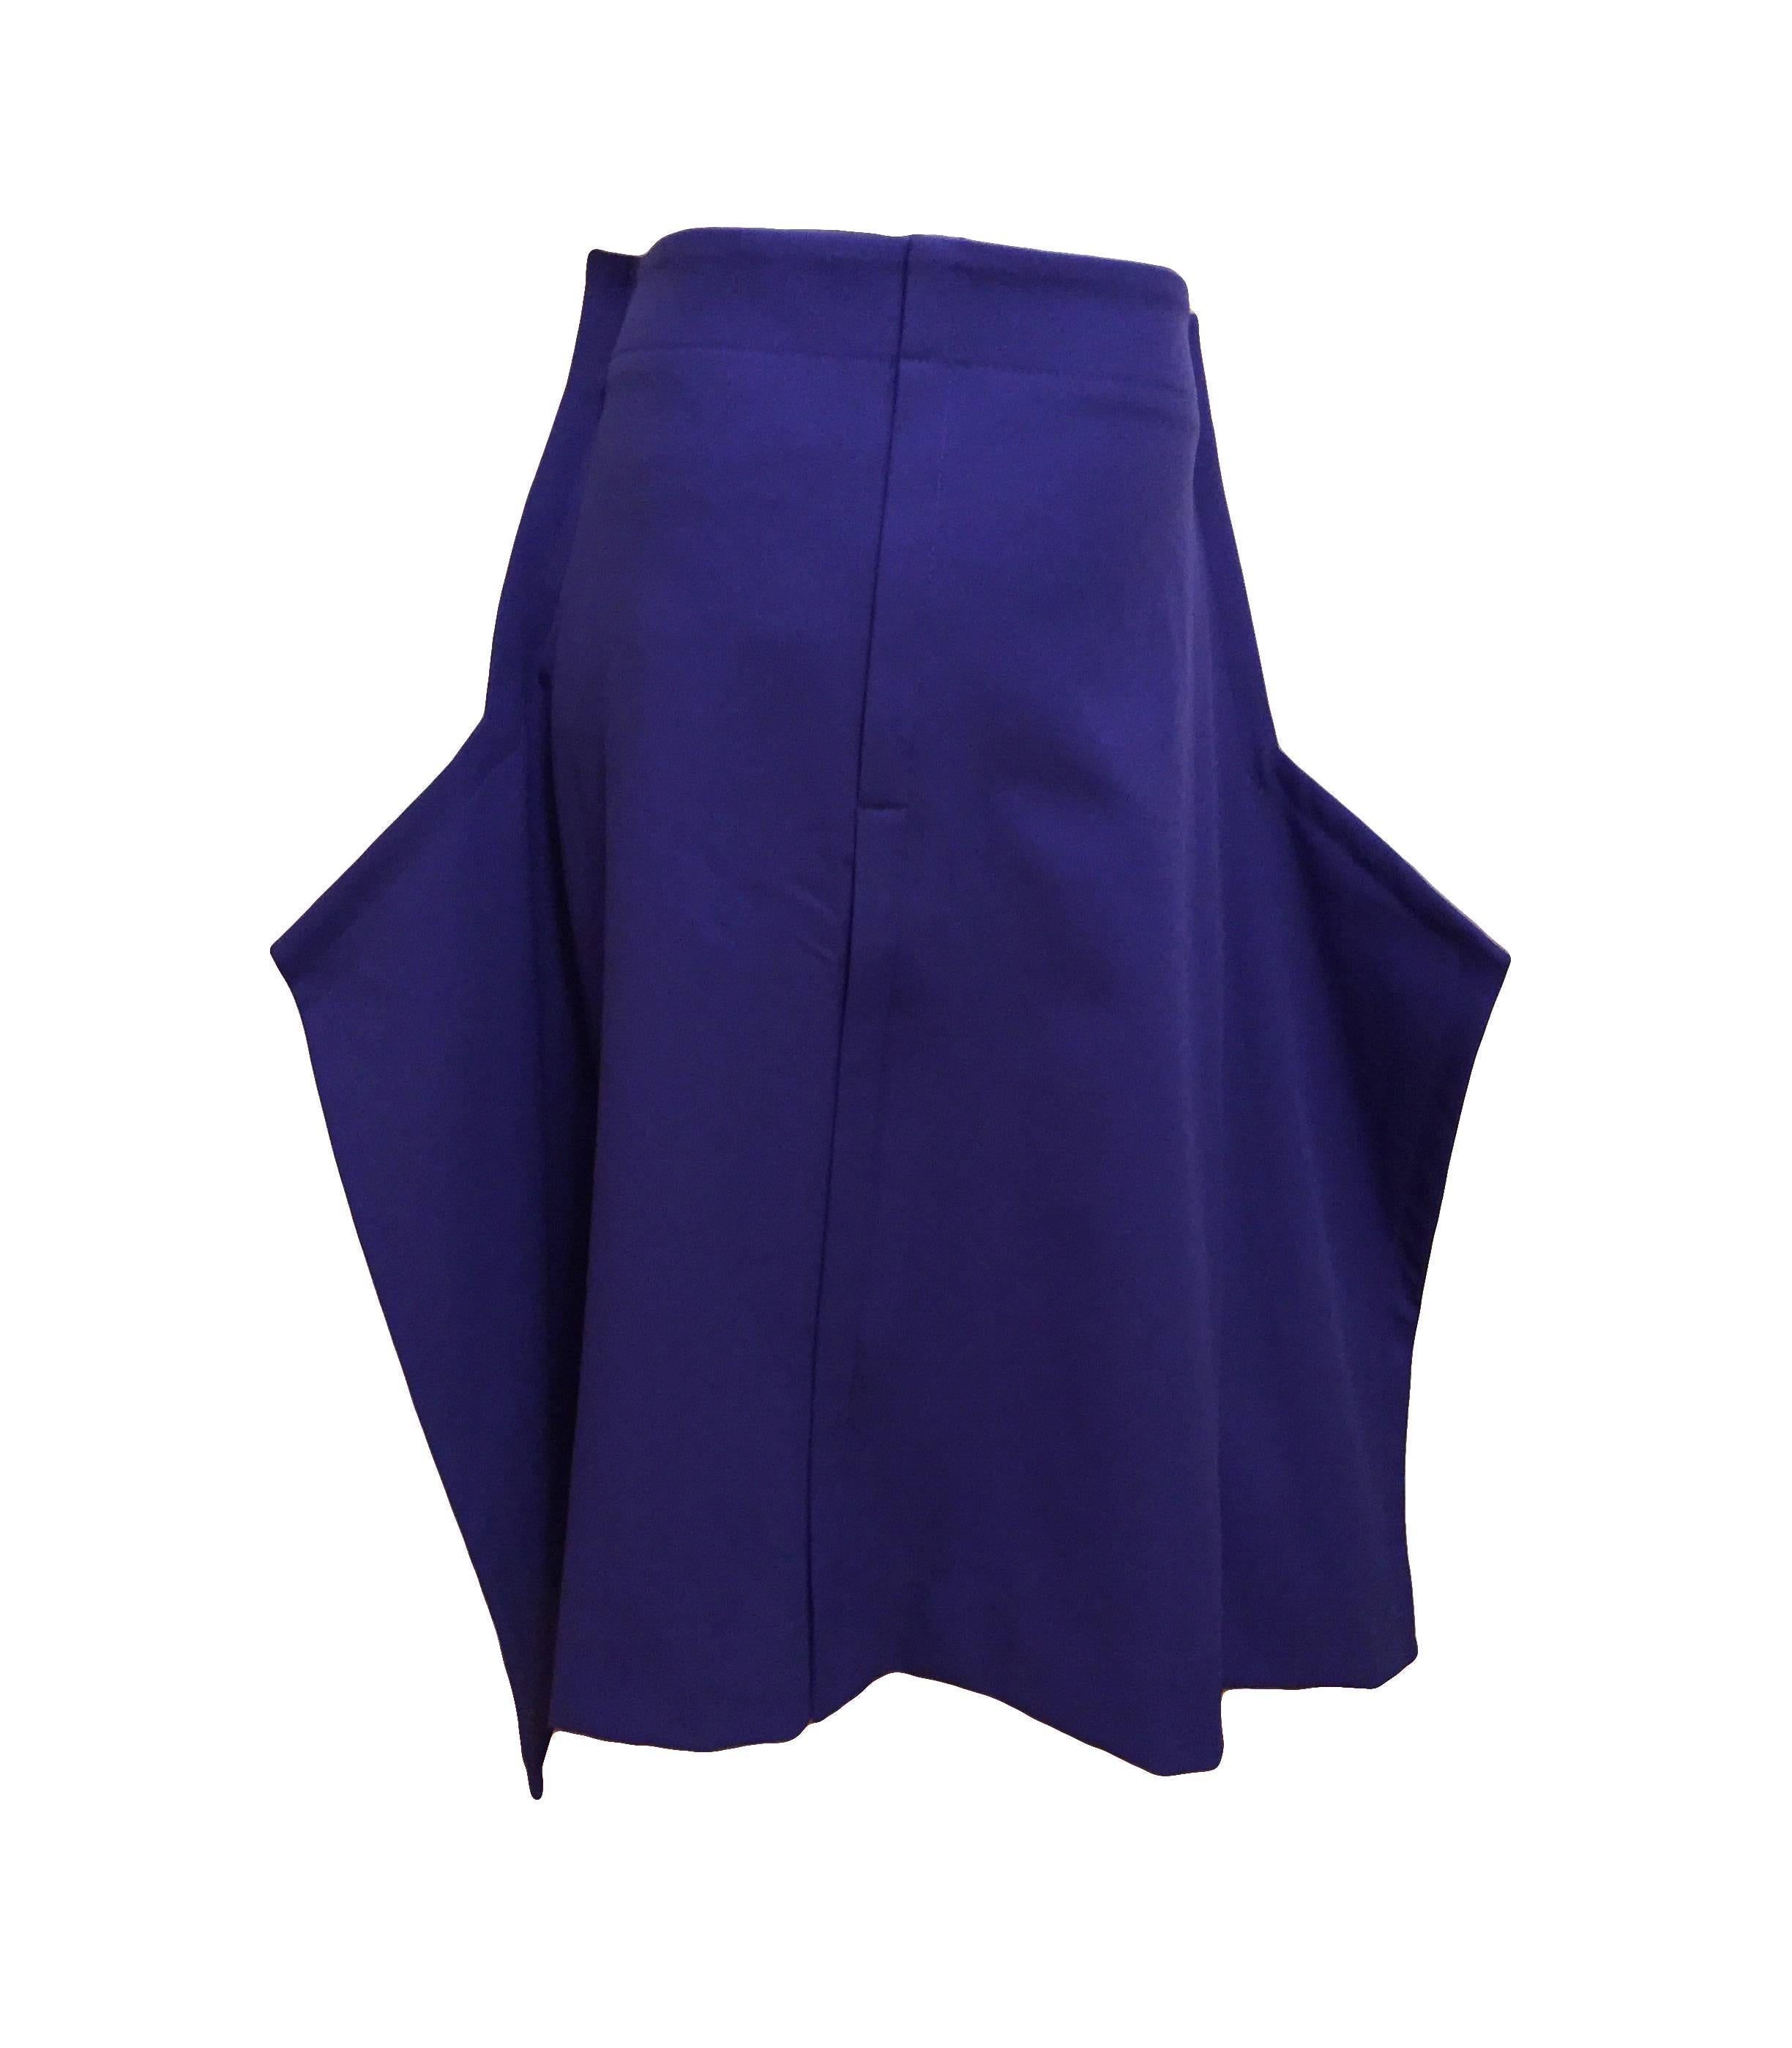 Comme des Garcons Cobalt 2-D Skirt, AW 2012 Paper Dolls Collection In New Condition For Sale In Bethesda, MD